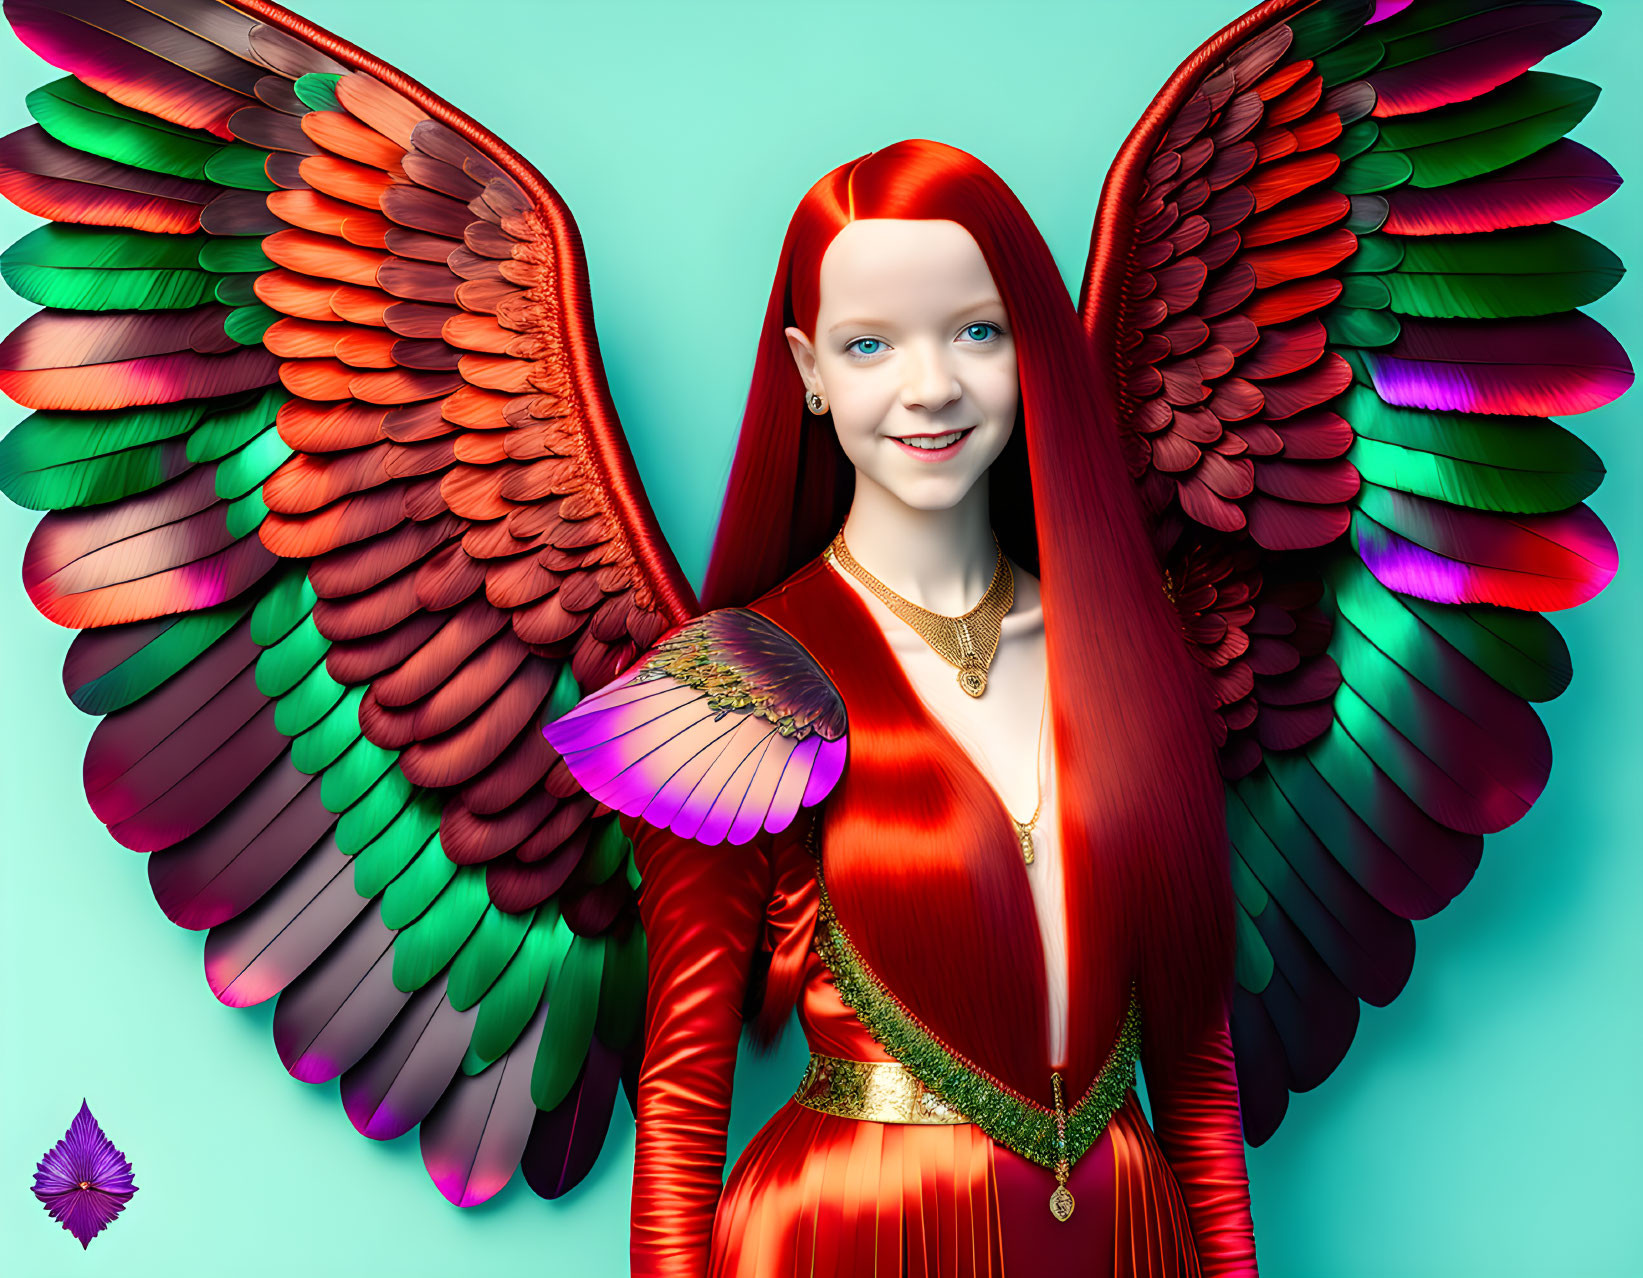 Colorful digital artwork: Woman with red hair, wings, red dress, smiling on teal background